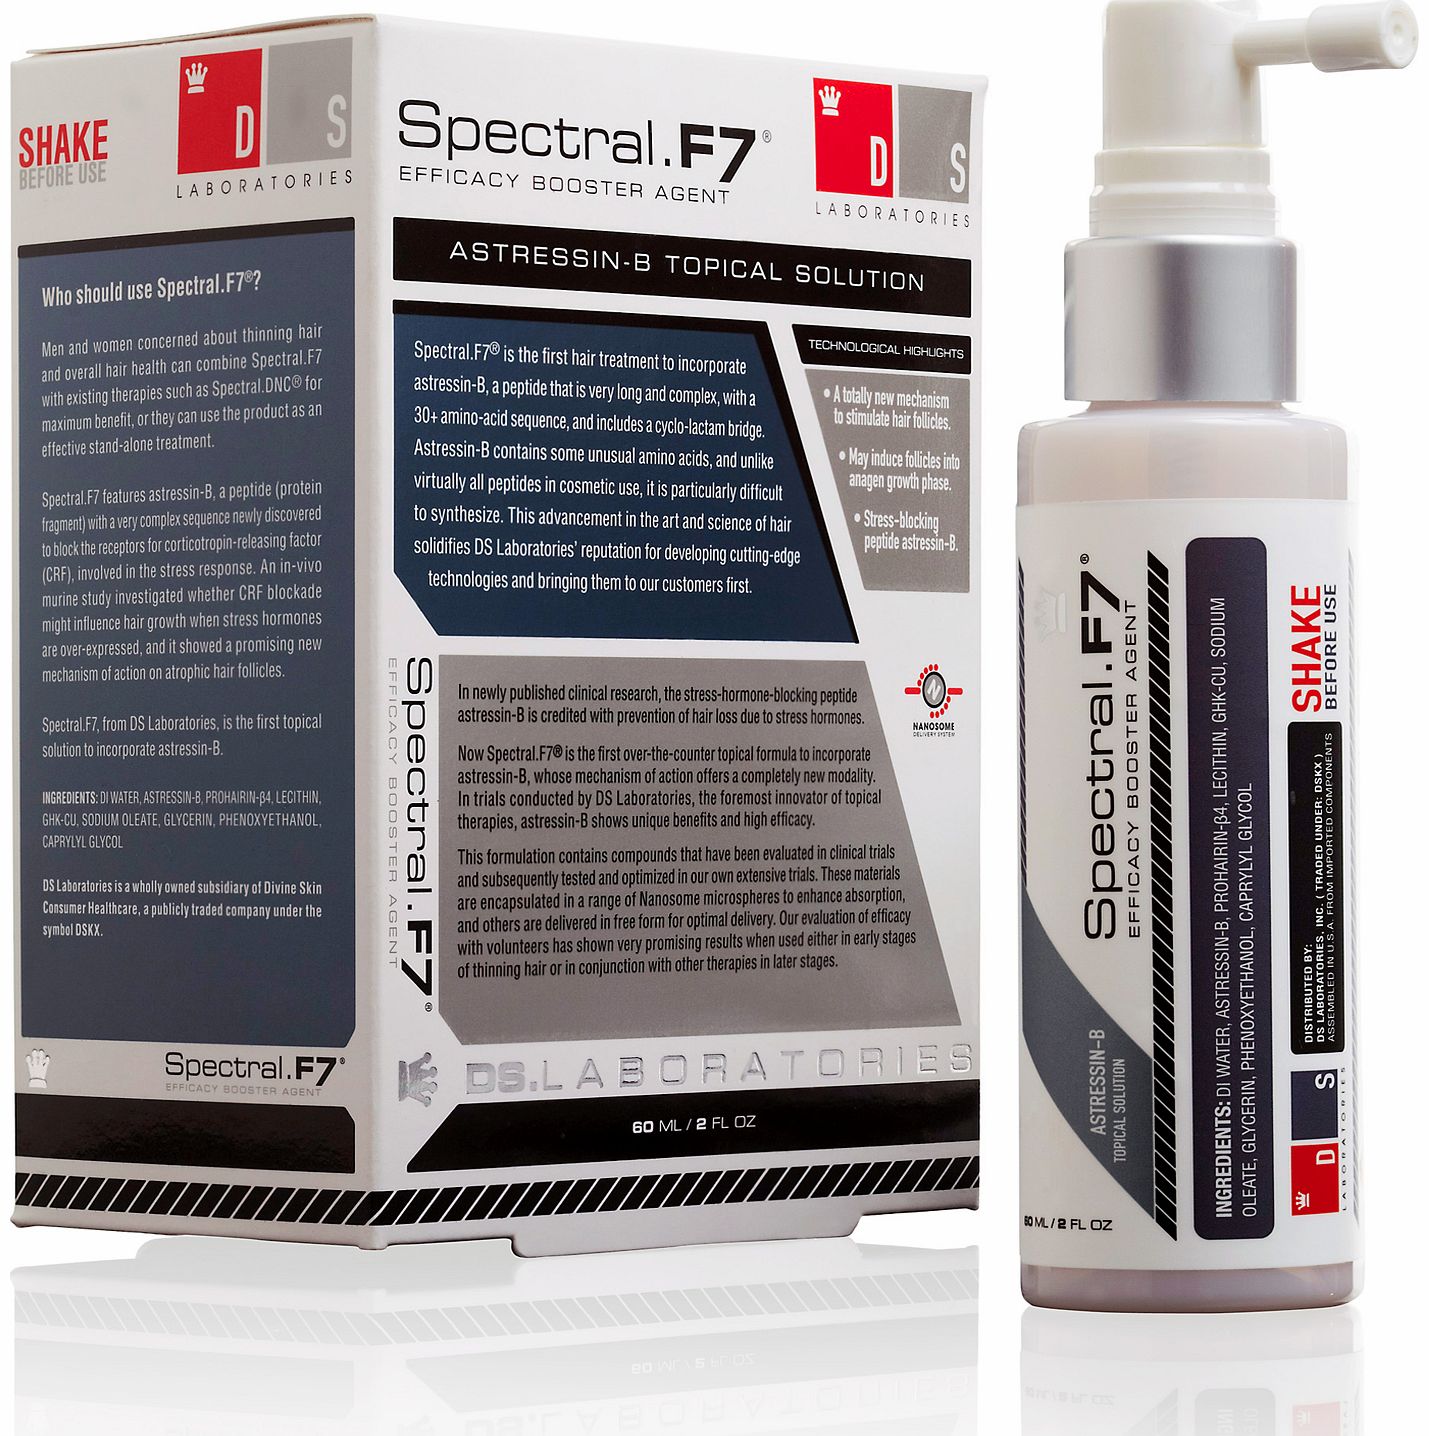 DS Laboratories Spectral.F7 Efficacy Booster